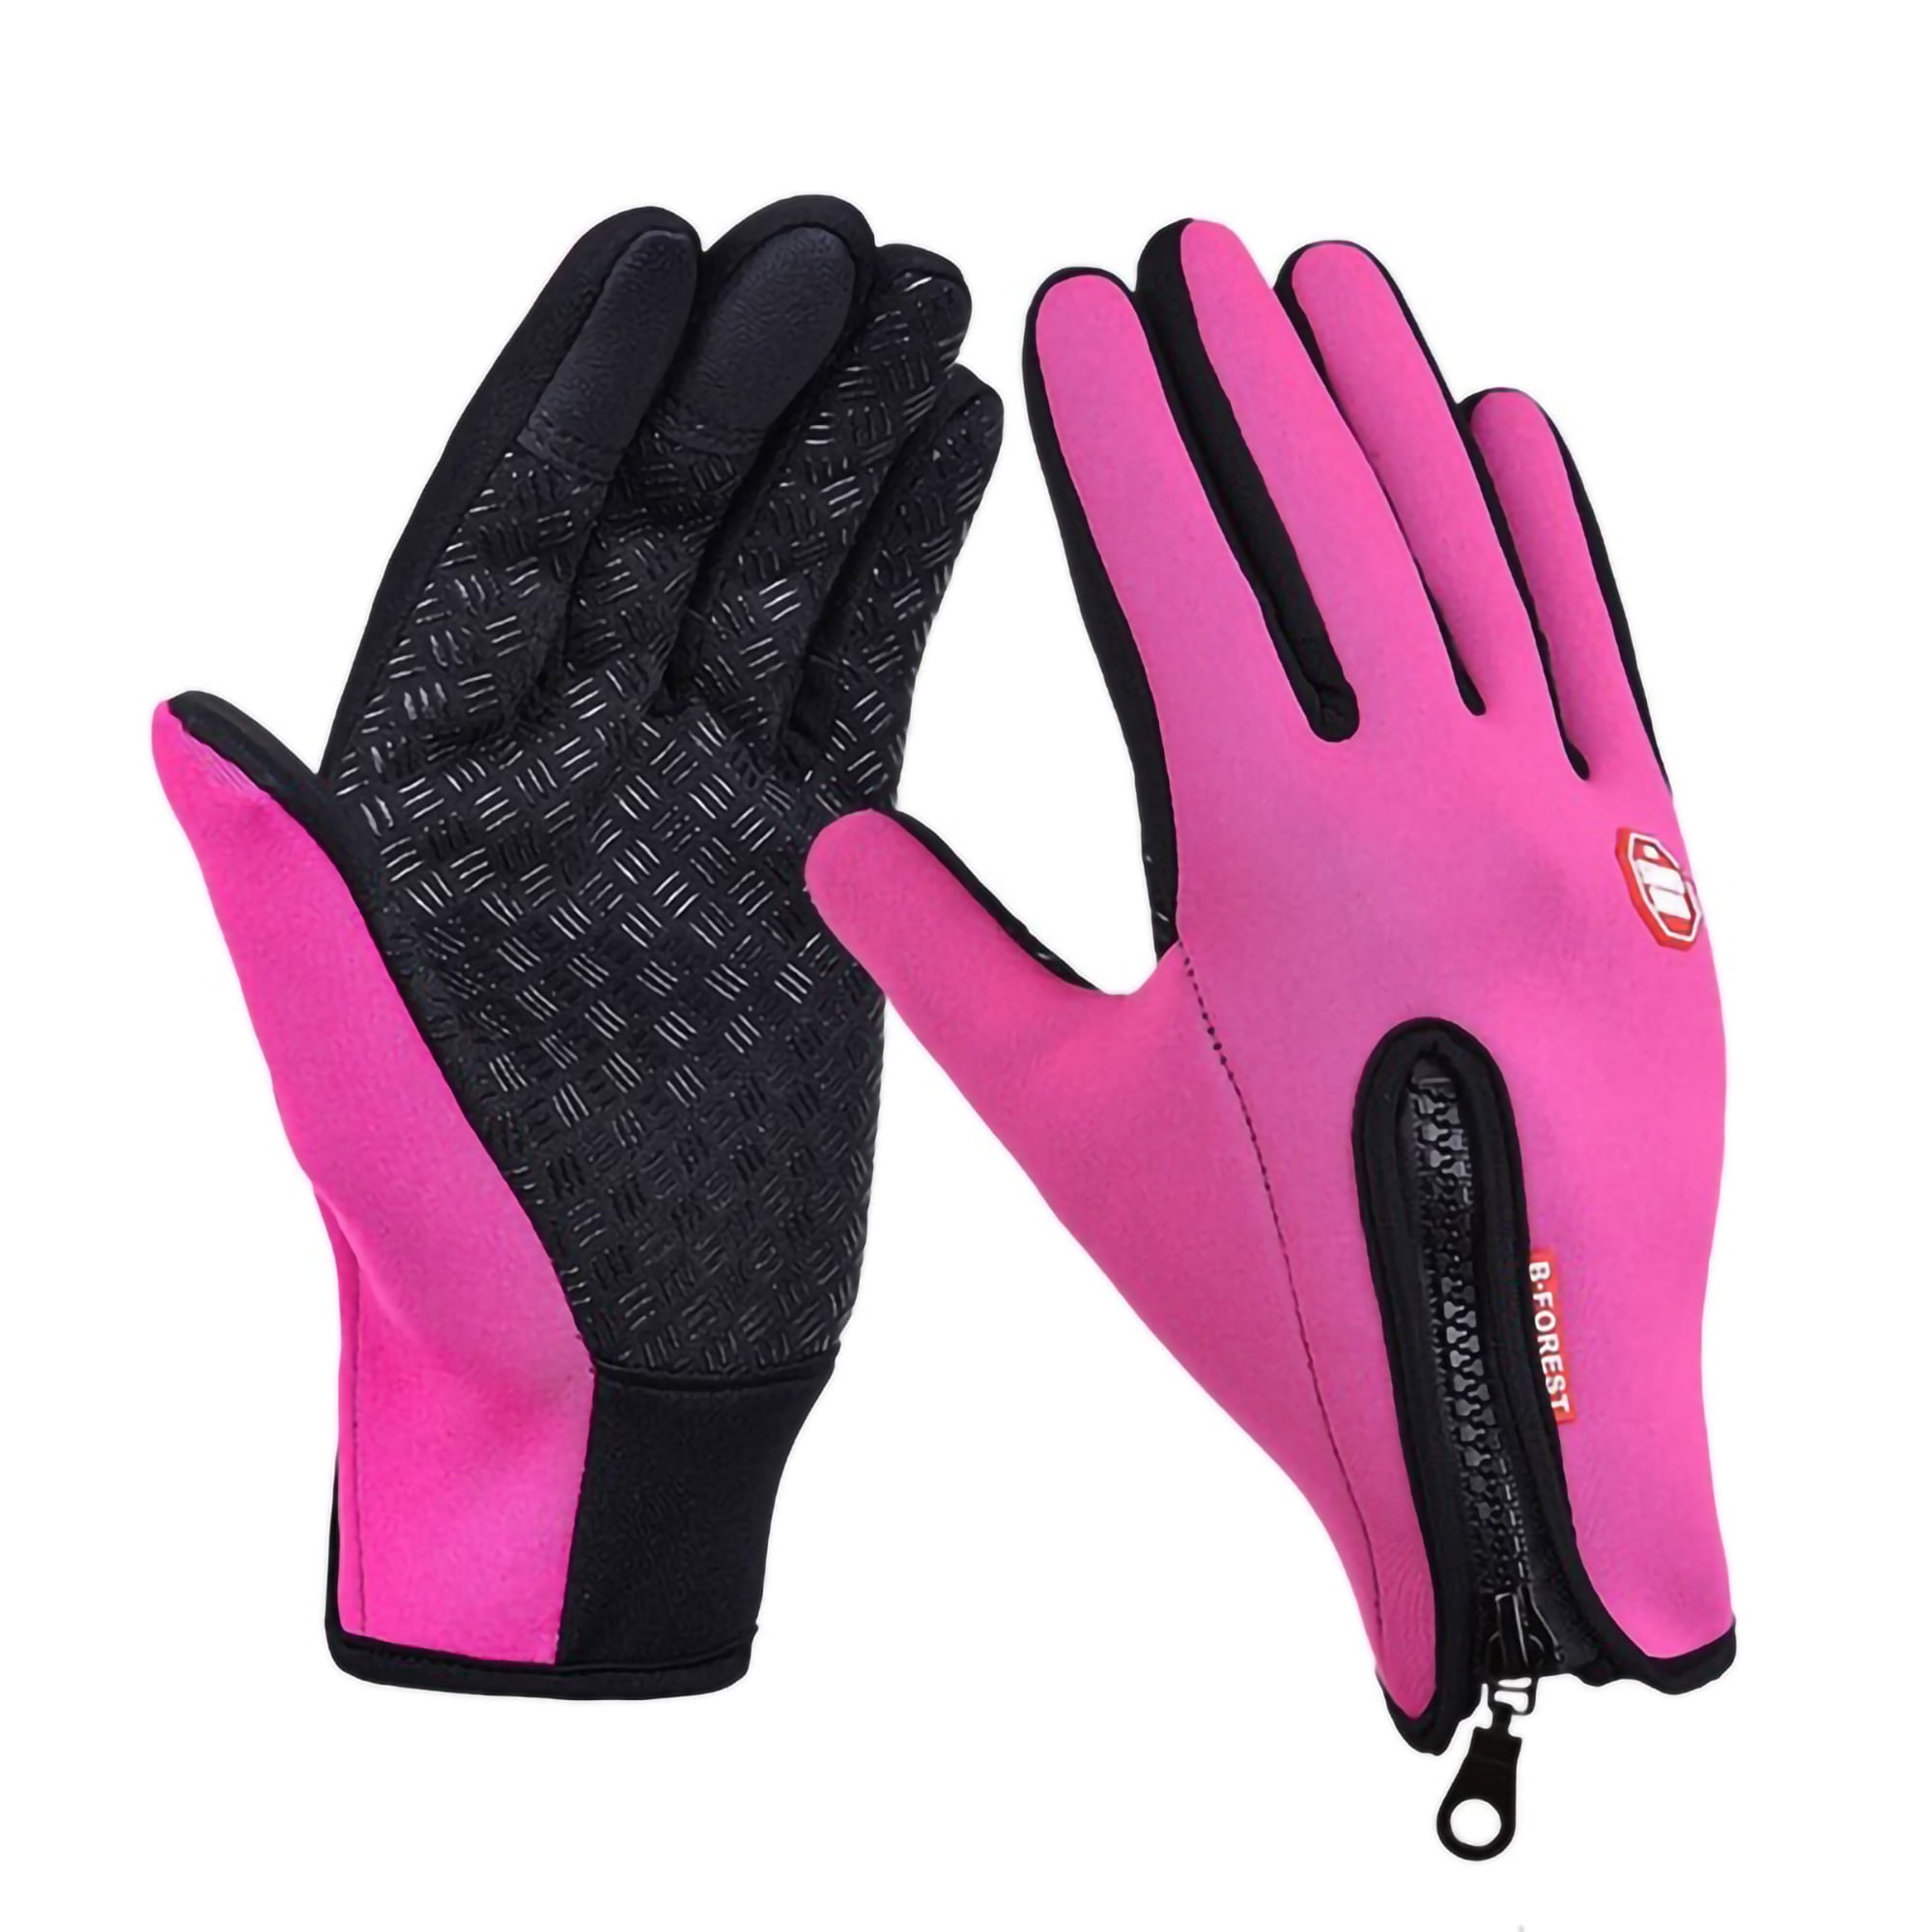 Details about   Motorcycling Bicycle Bike Thermal Gloves Cycling Mittens Neoprene Touchscreen 